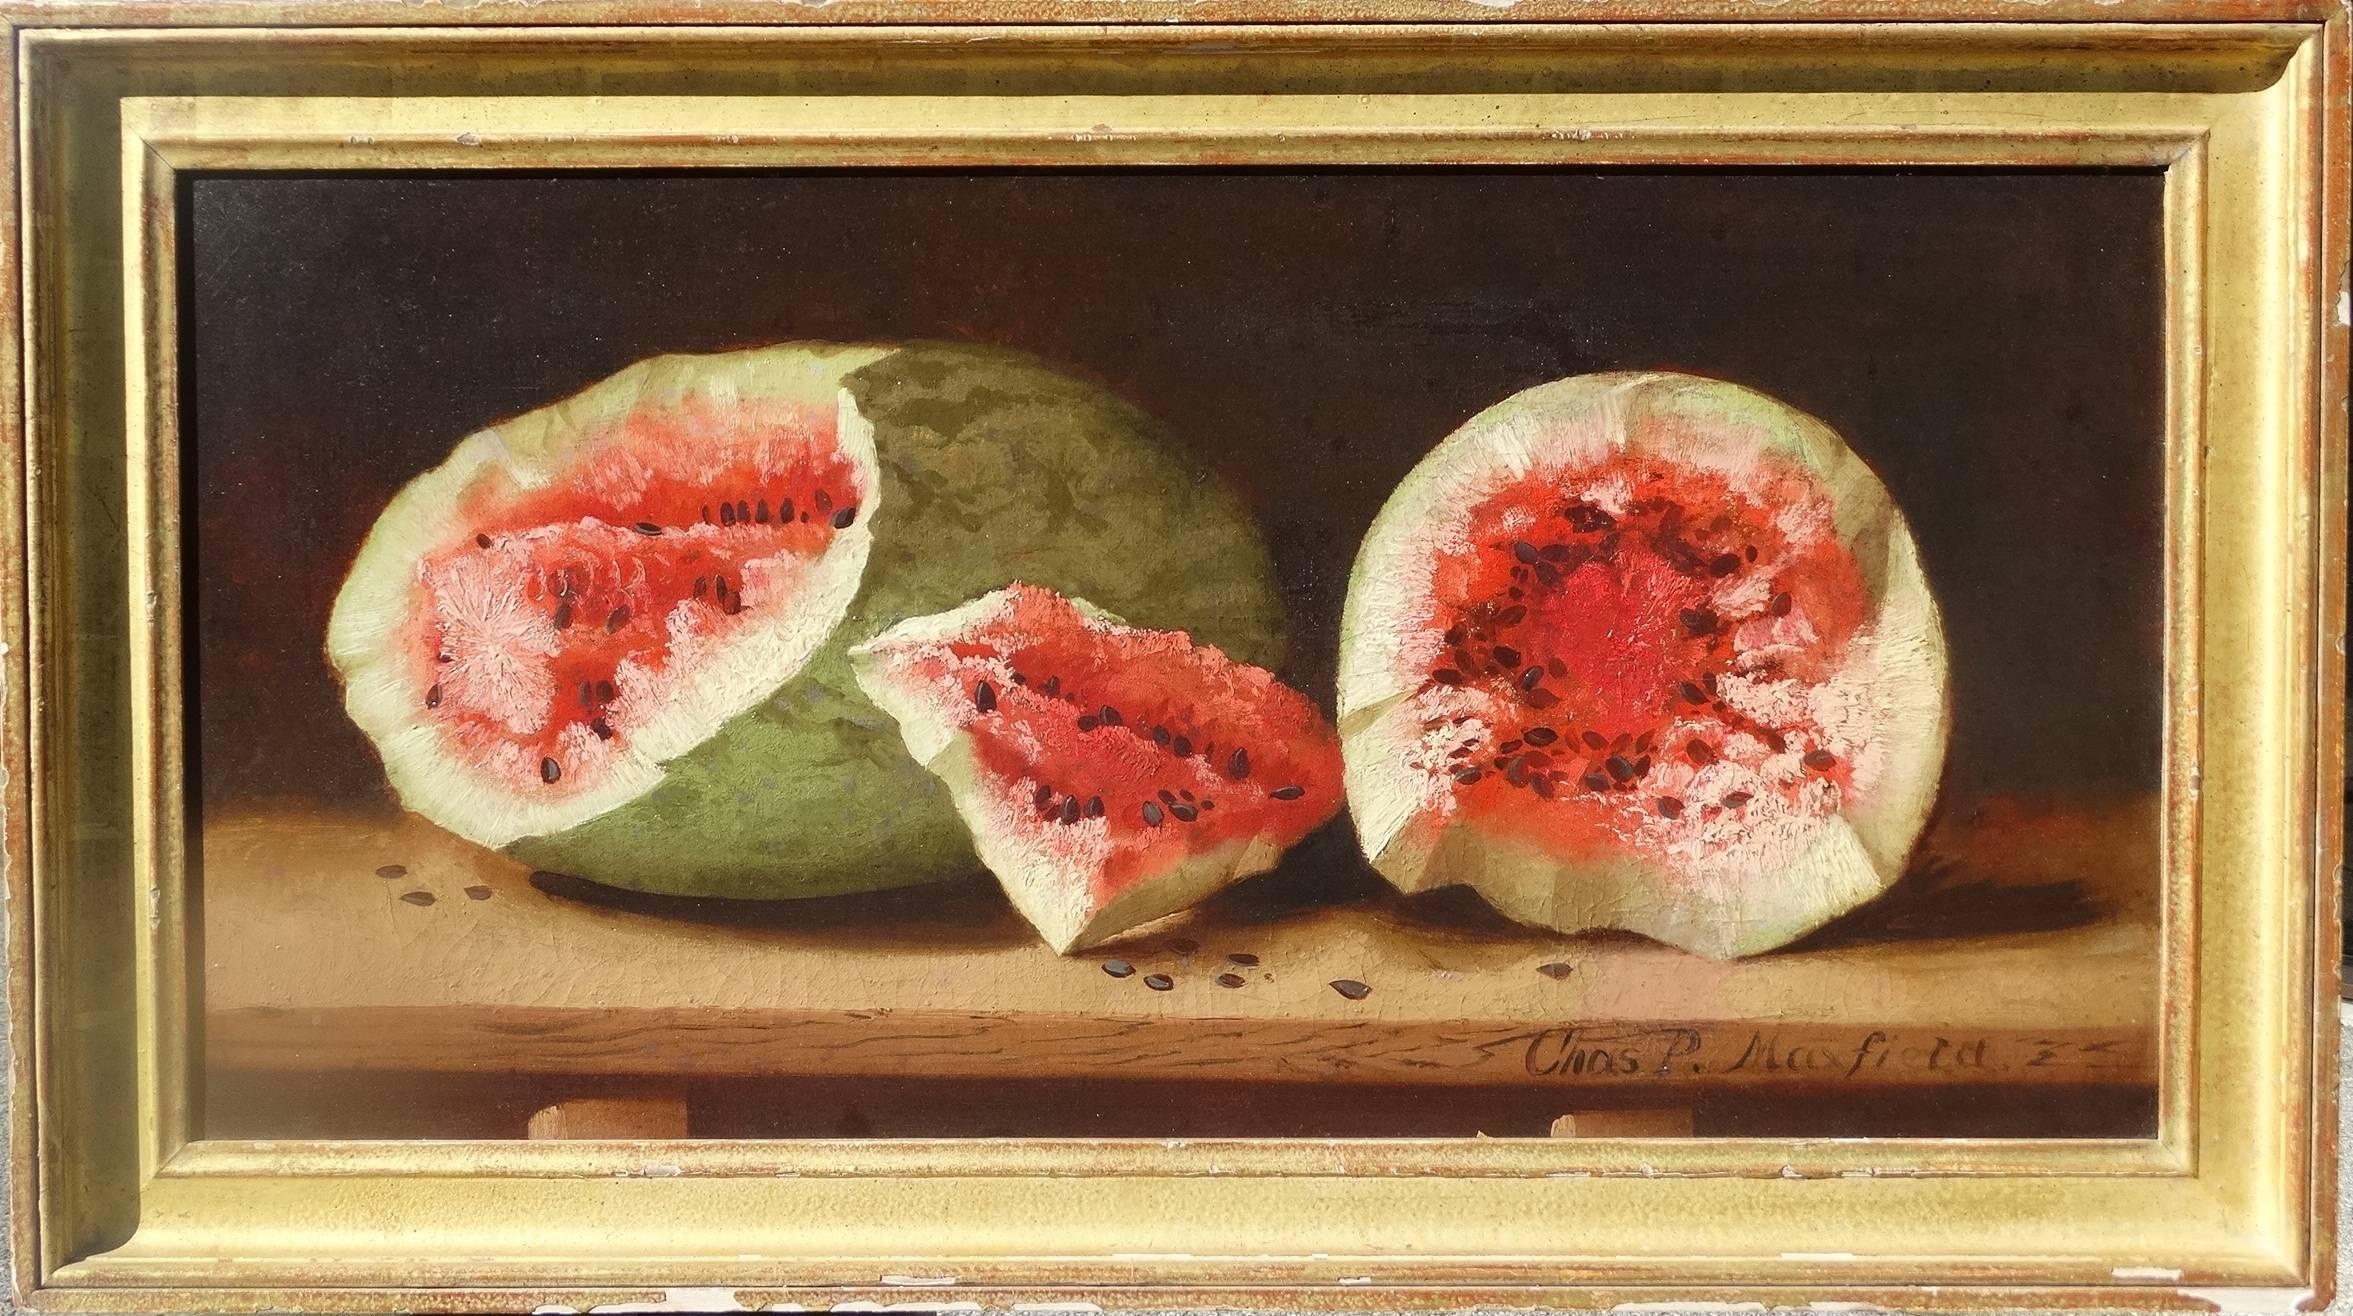 Watermelons on a Ledge - Painting by Charles P. Maxfield